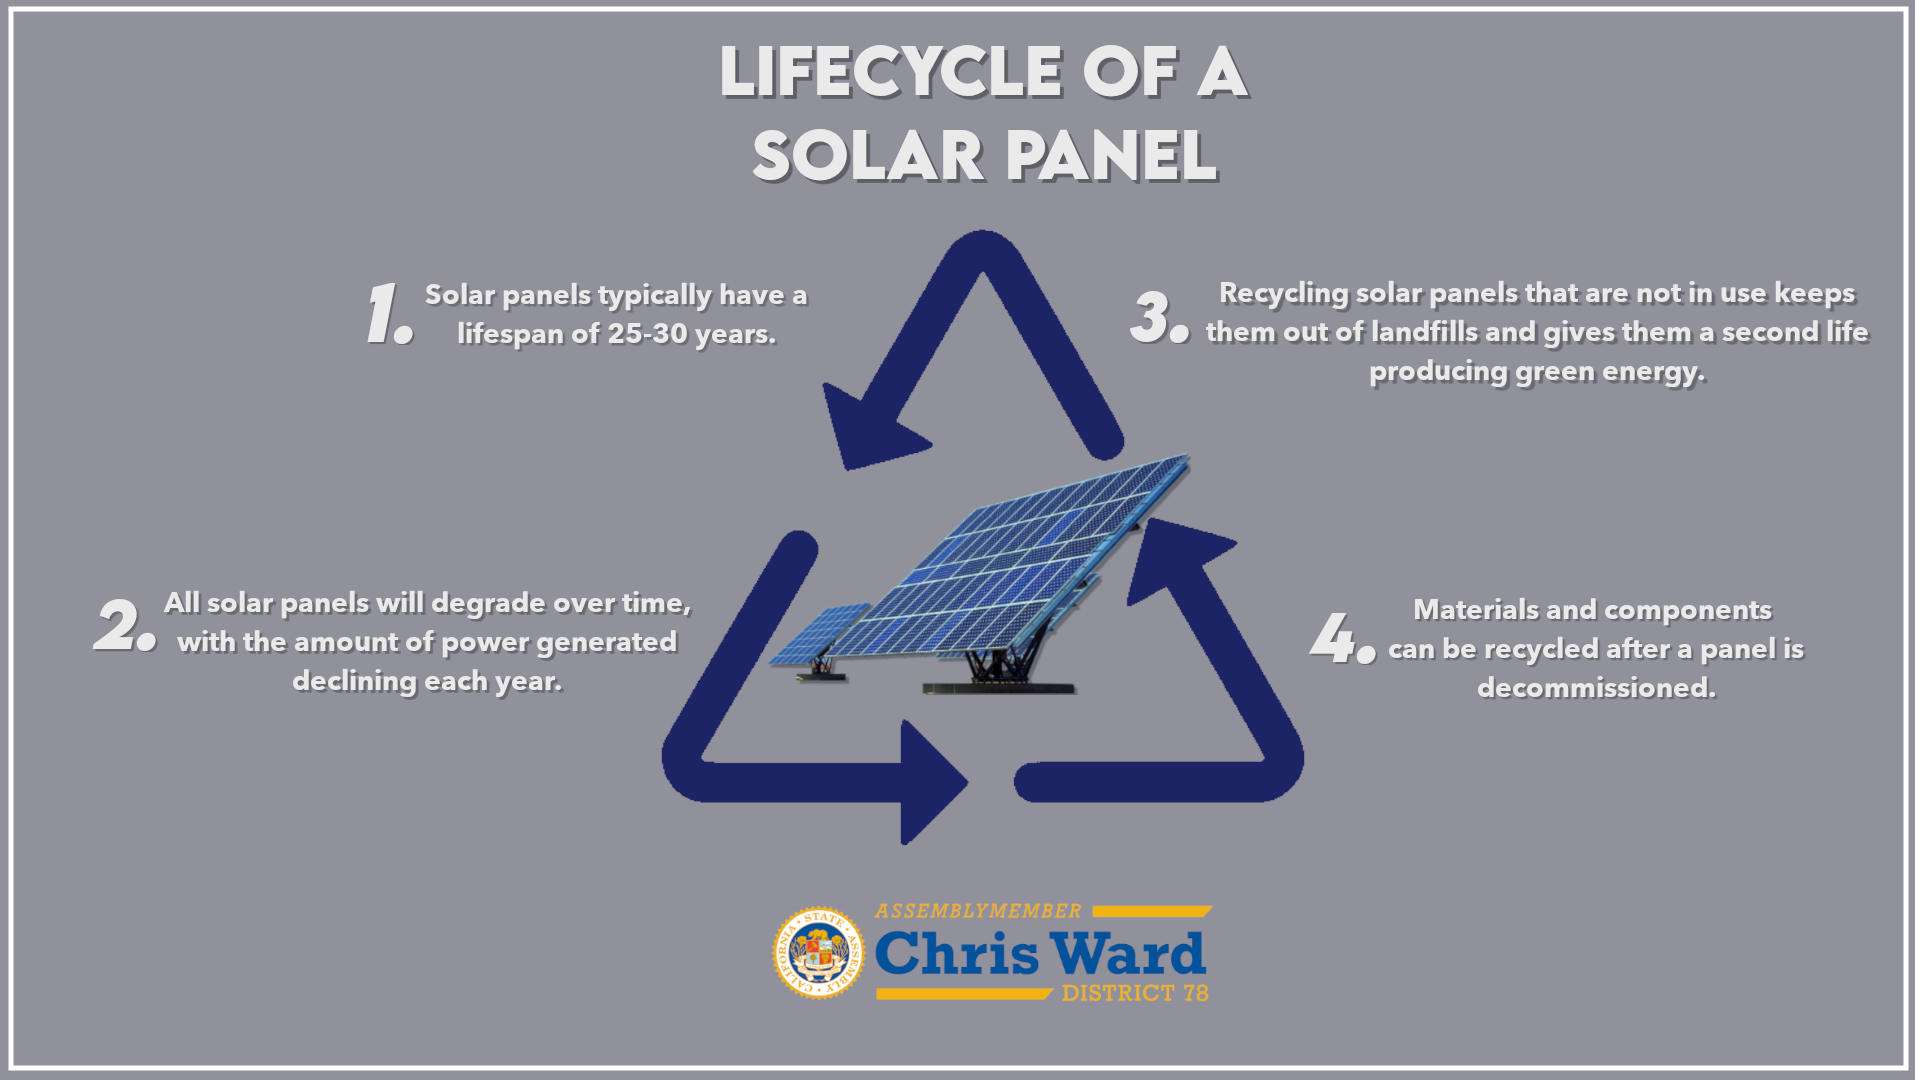 Lifecycle of a solar panel